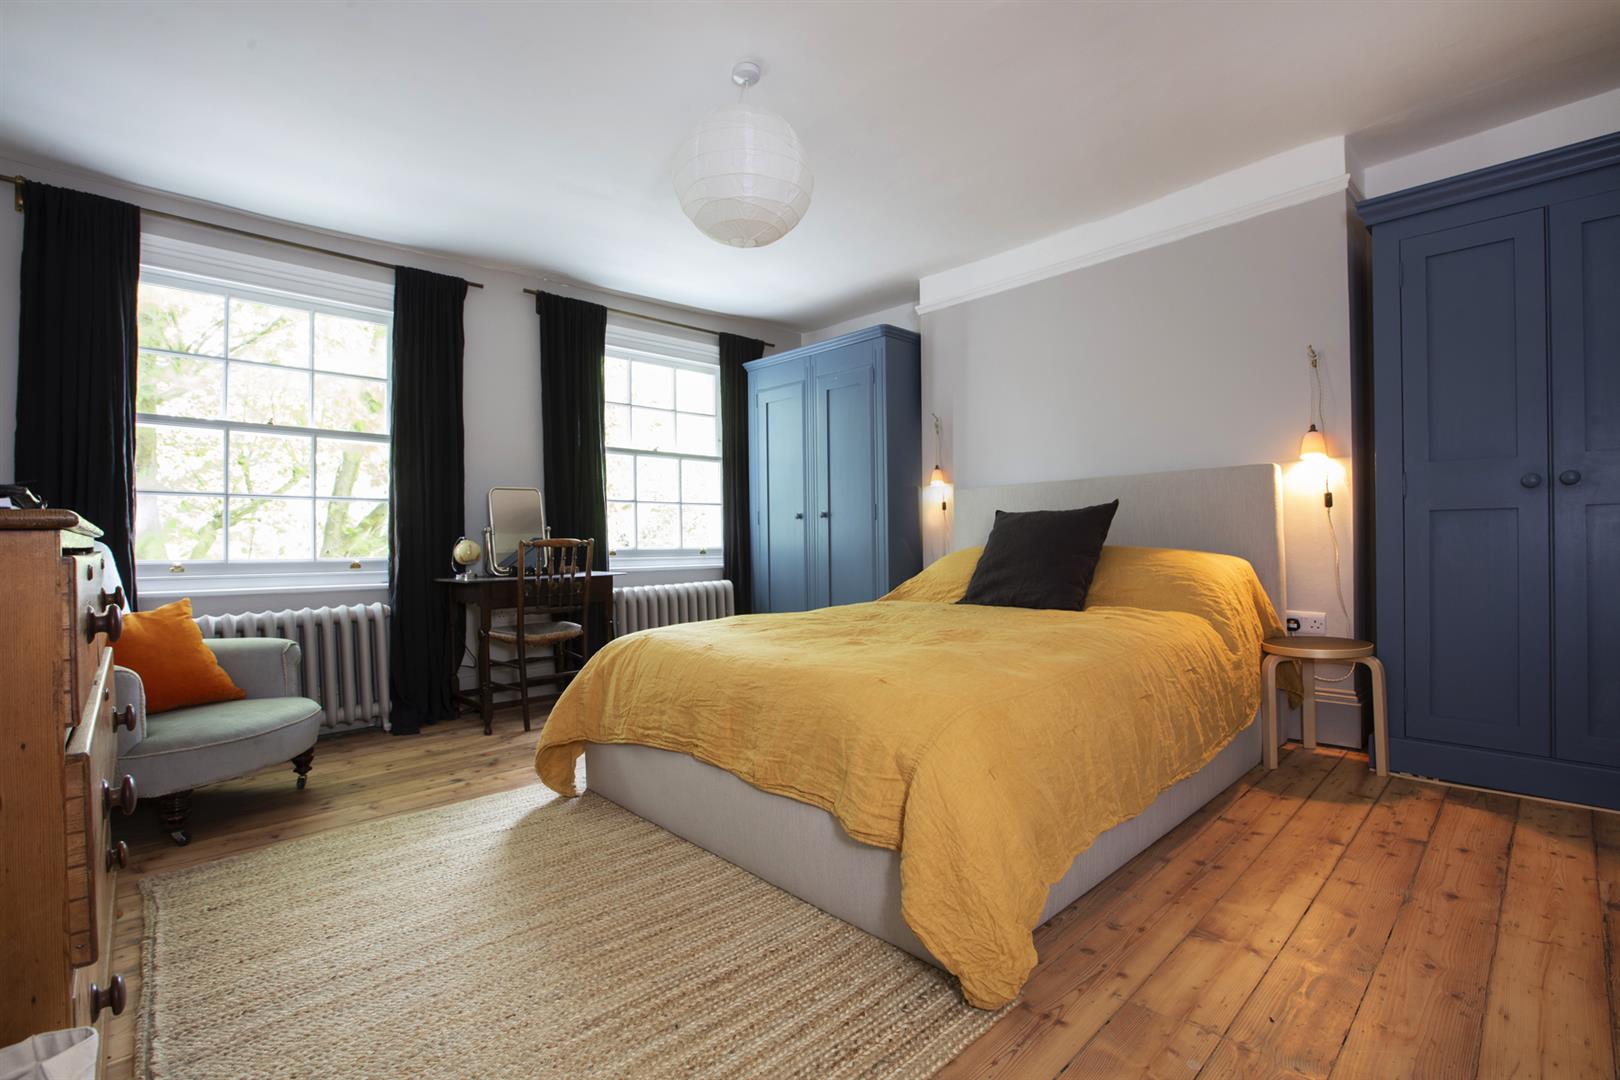 Flat - Conversion For Sale in Grove Lane, Camberwell, SE5 944 view4